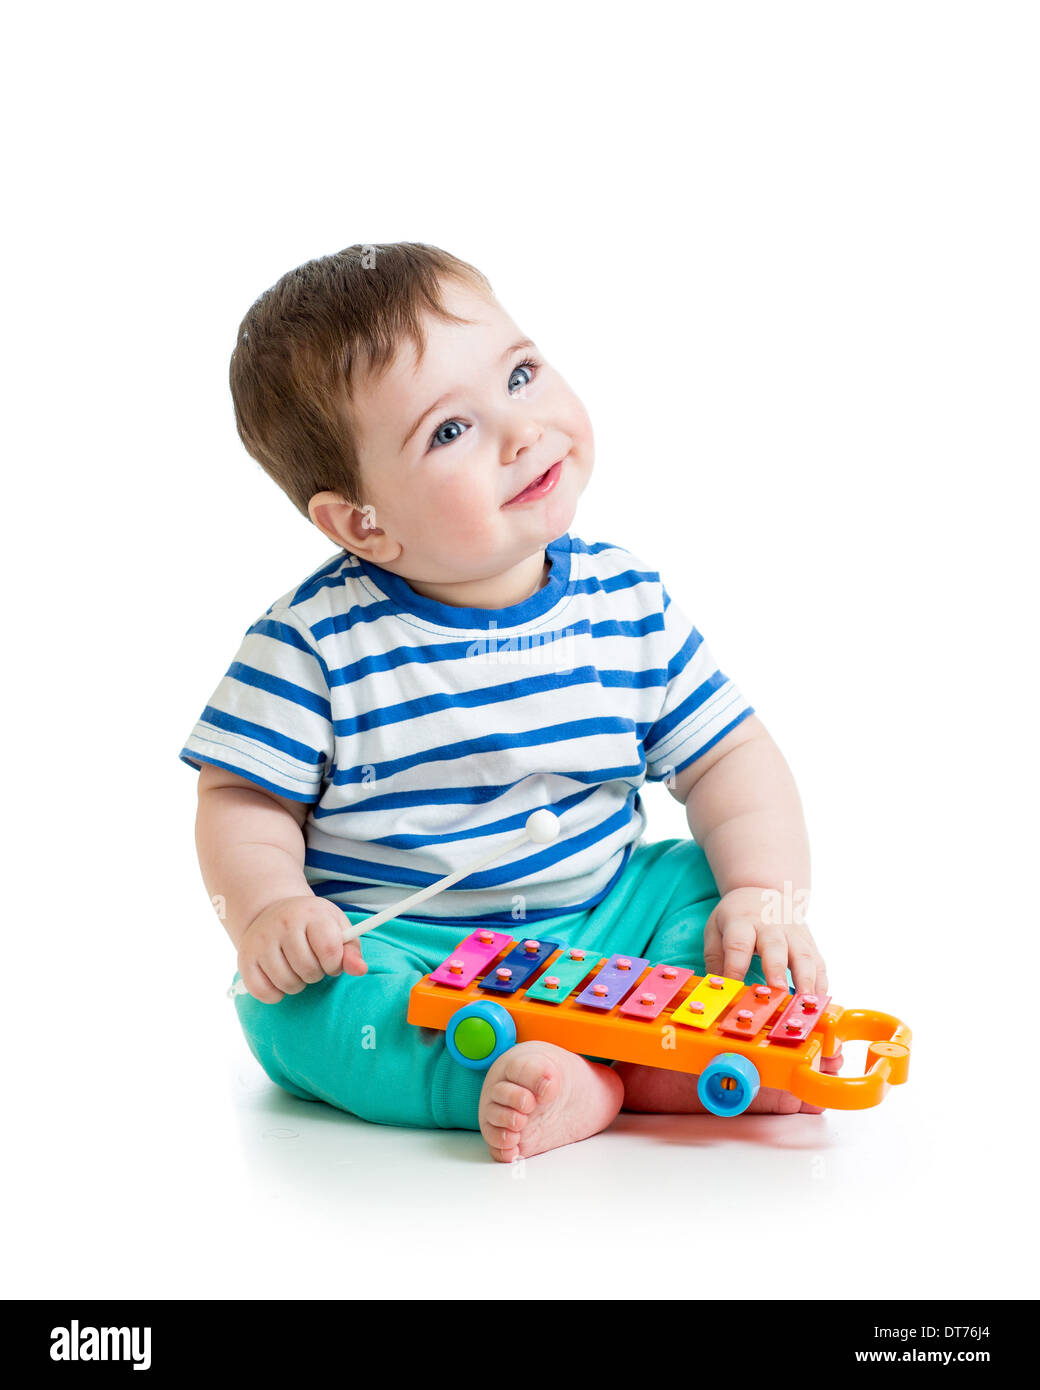 Nice baby playing with musical toys Stock Photo